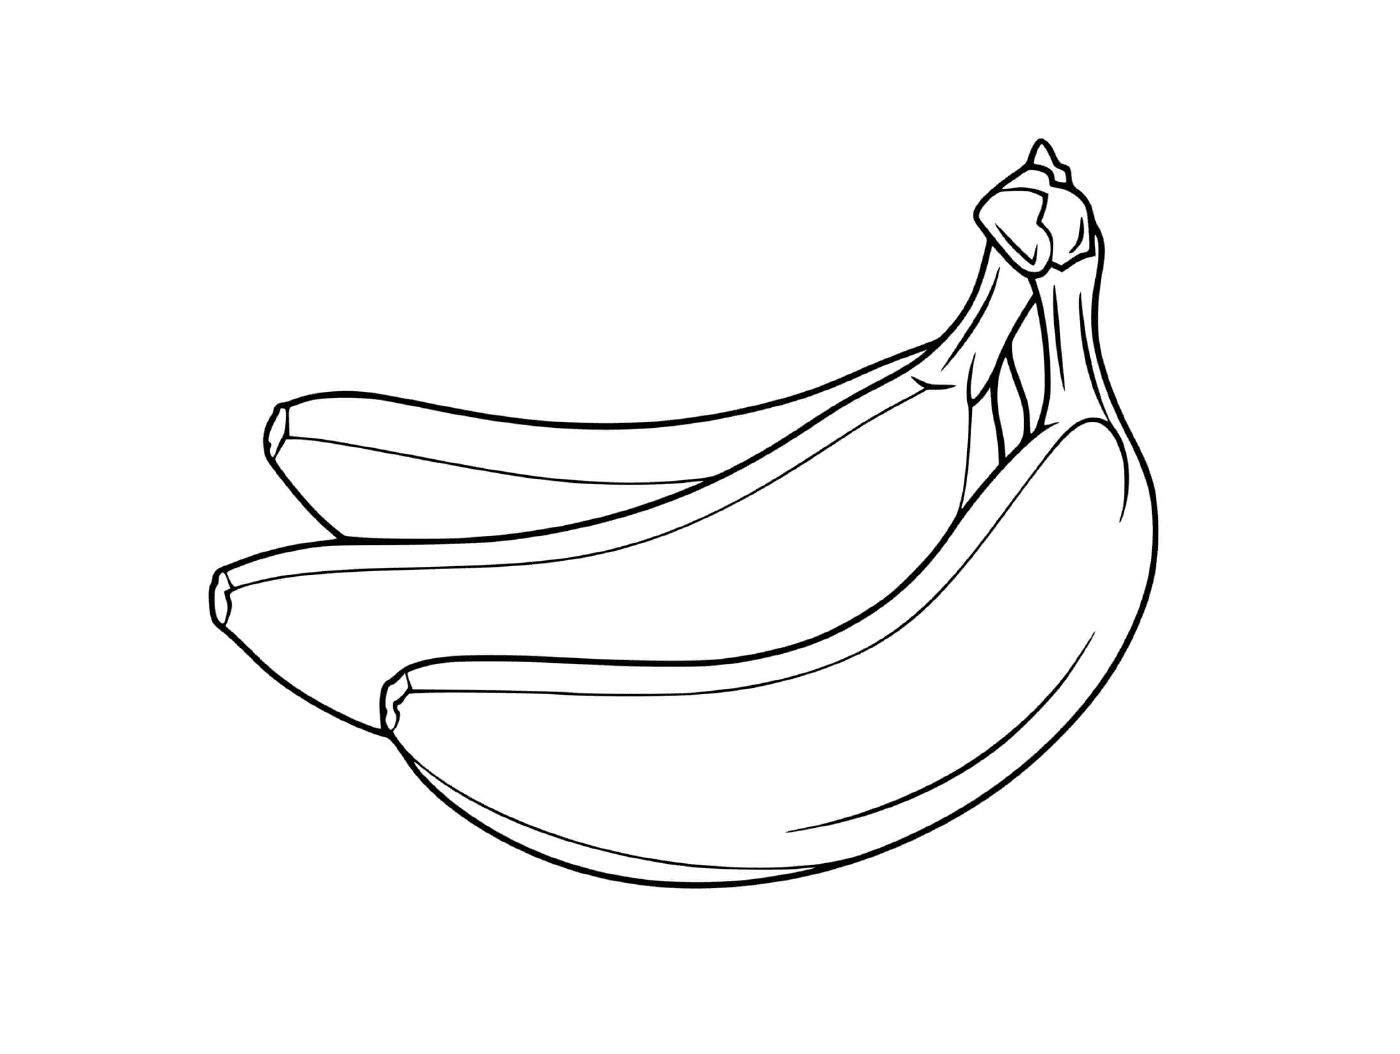  Two bananas on a white background 